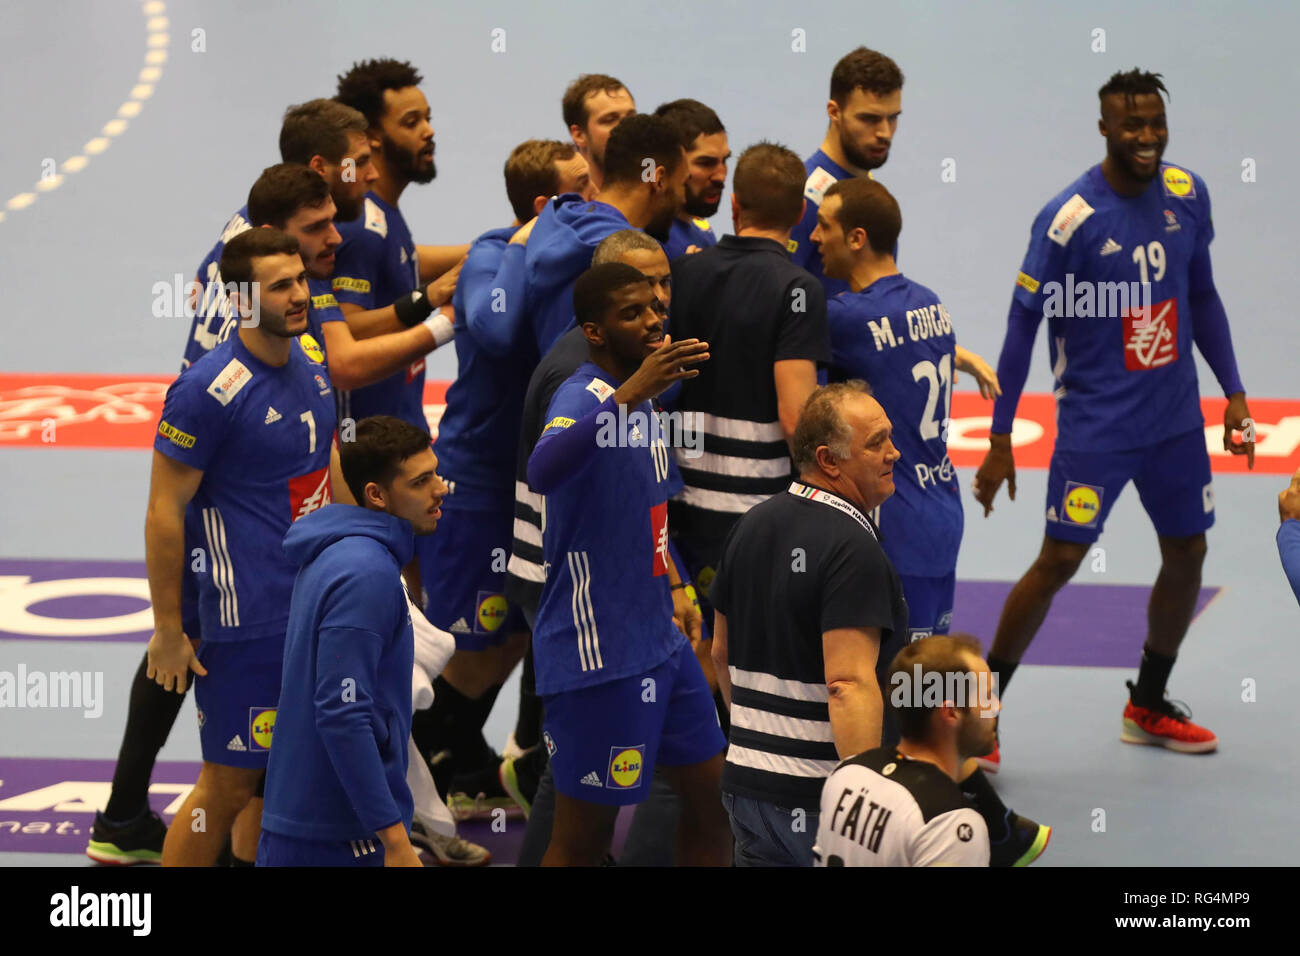 Herning, Denmark. 27th January 2019.Celebration Victory France during the IHF Men's World Championship 2019, final round handball match between Germany and France on January 27, 2019 at Jyske Bank Boxen in Herning, Denmark - Photo Laurent Lairys / MAXPPP Credit: Laurent Lairys/Agence Locevaphotos/Alamy Live News Stock Photo